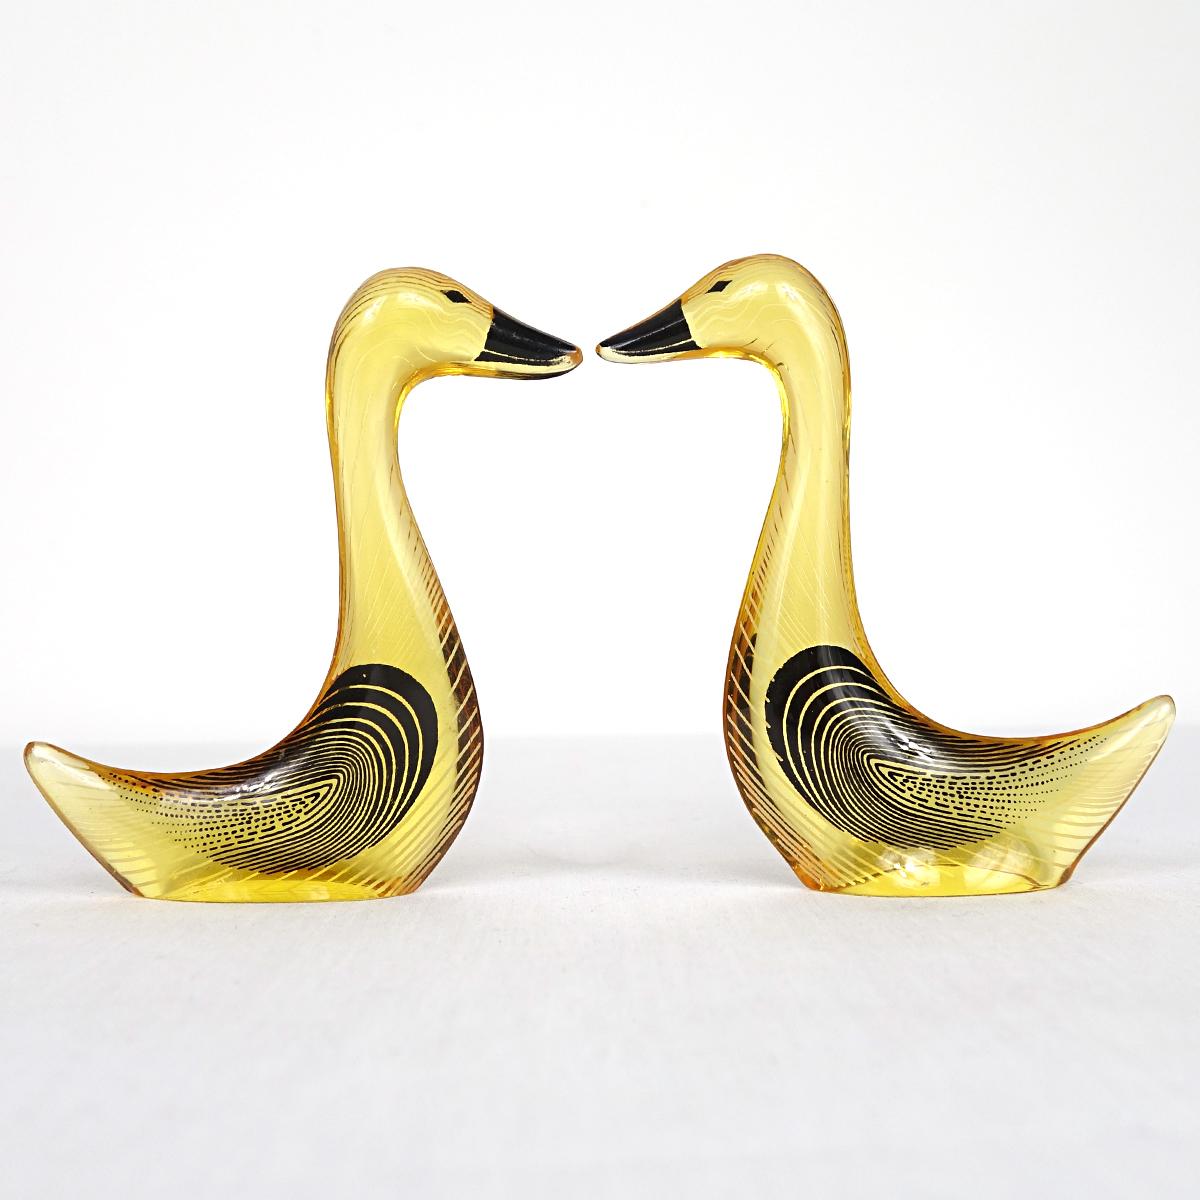 Pair of geese designed and made by Abraham Palatnik. 

The Brazilian artist Abraham Palatnik (1928 - 2020) was the founder of the technological movement in Brazilian art, and a Pioneer in making Kinetic sculptures.
In the late 40th (1949) he